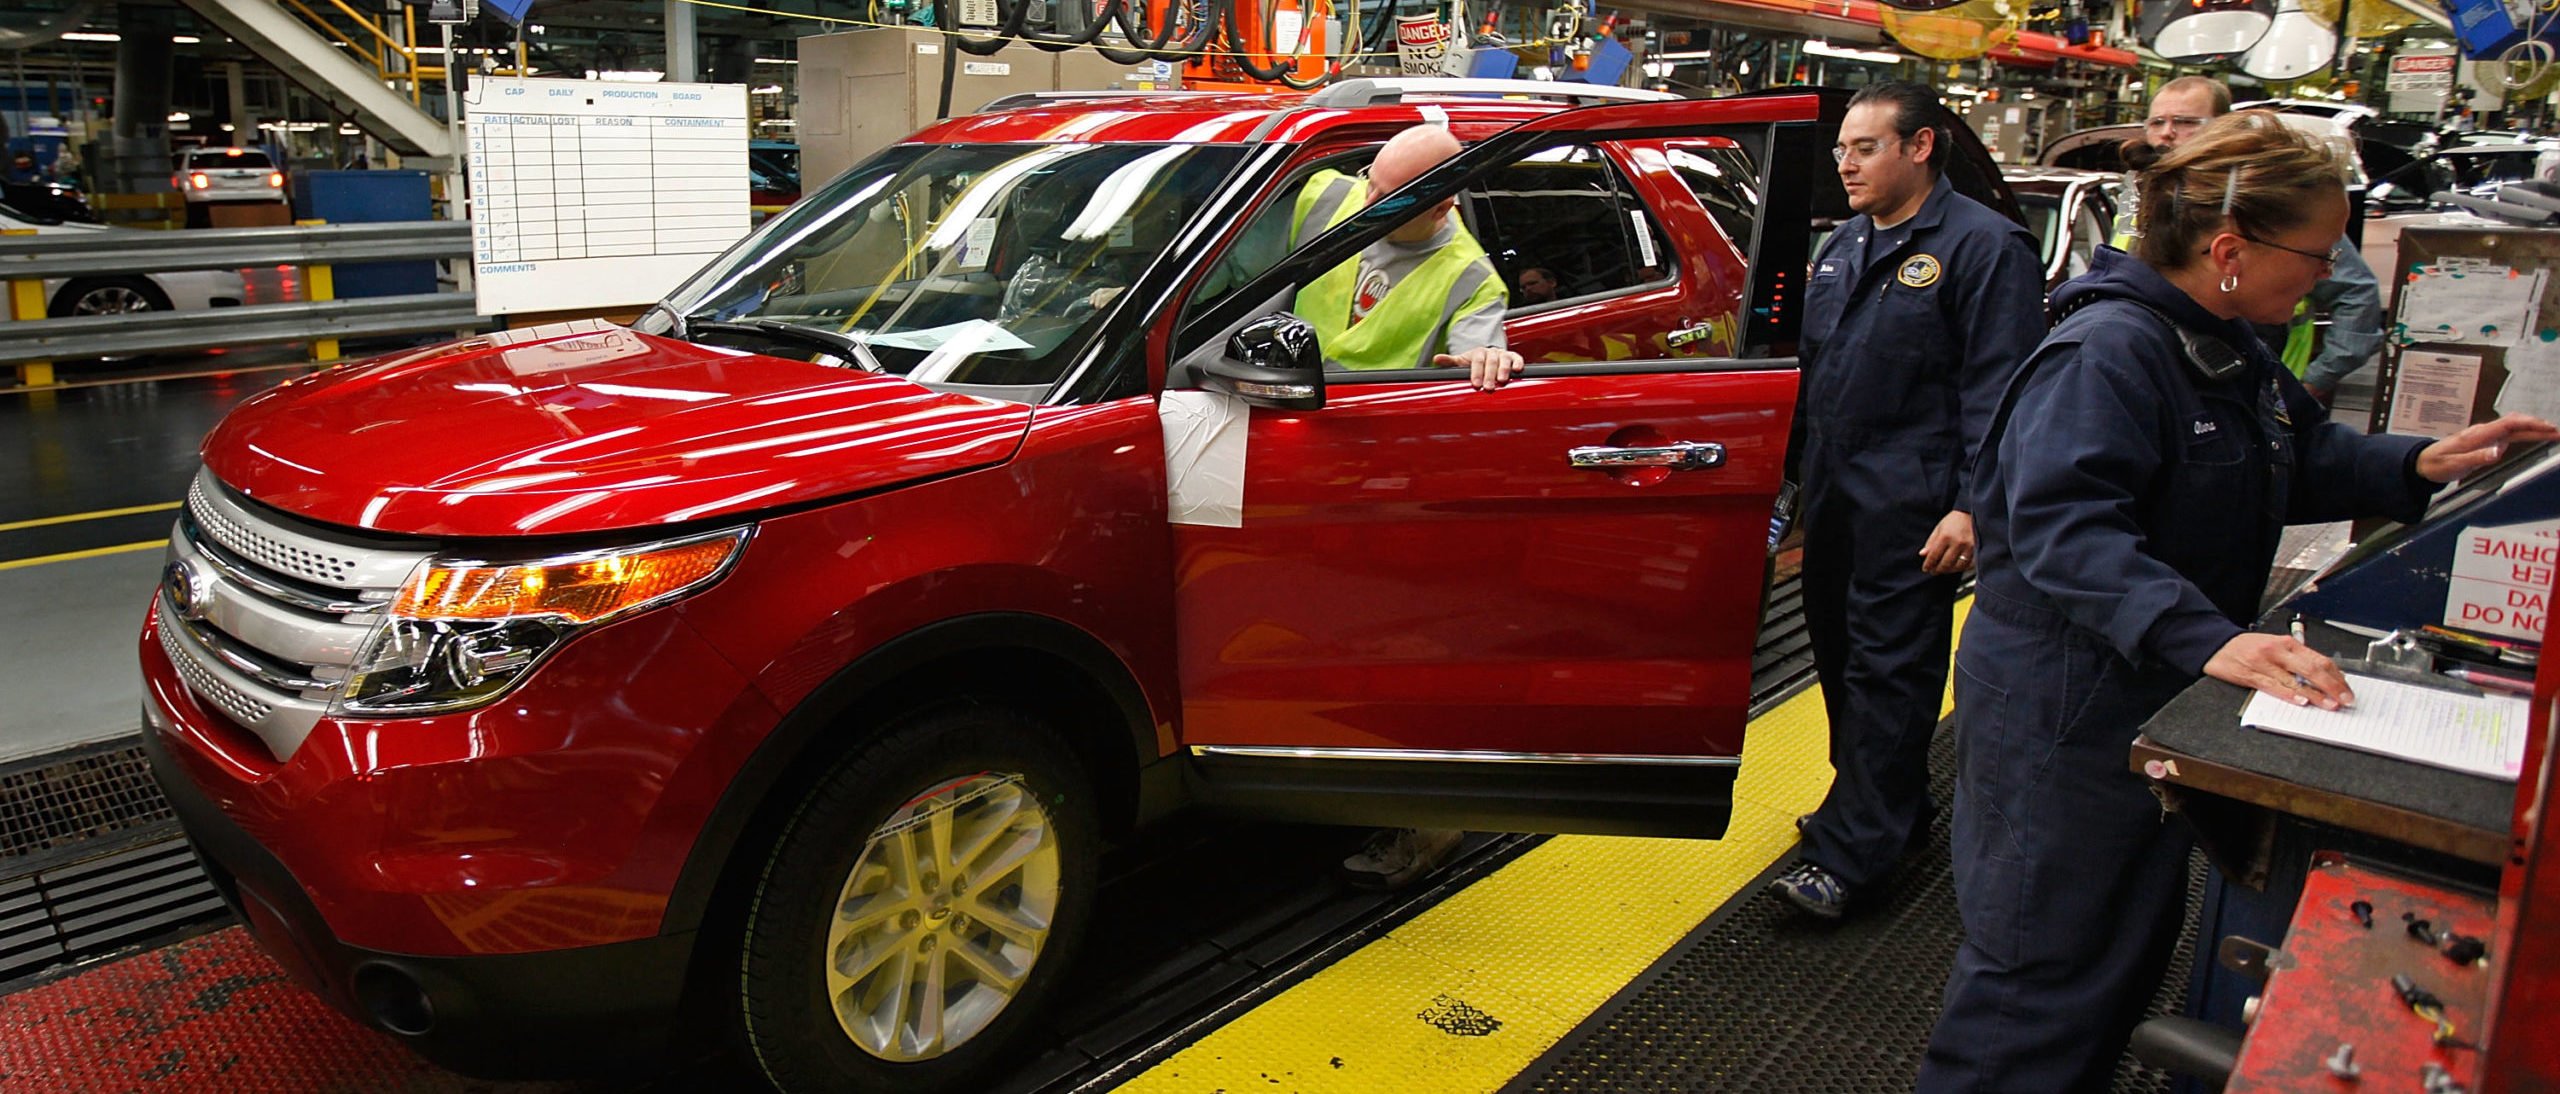 Ford Recalls Nearly 2 Million Cars As Parts Could Fly Off In Traffic